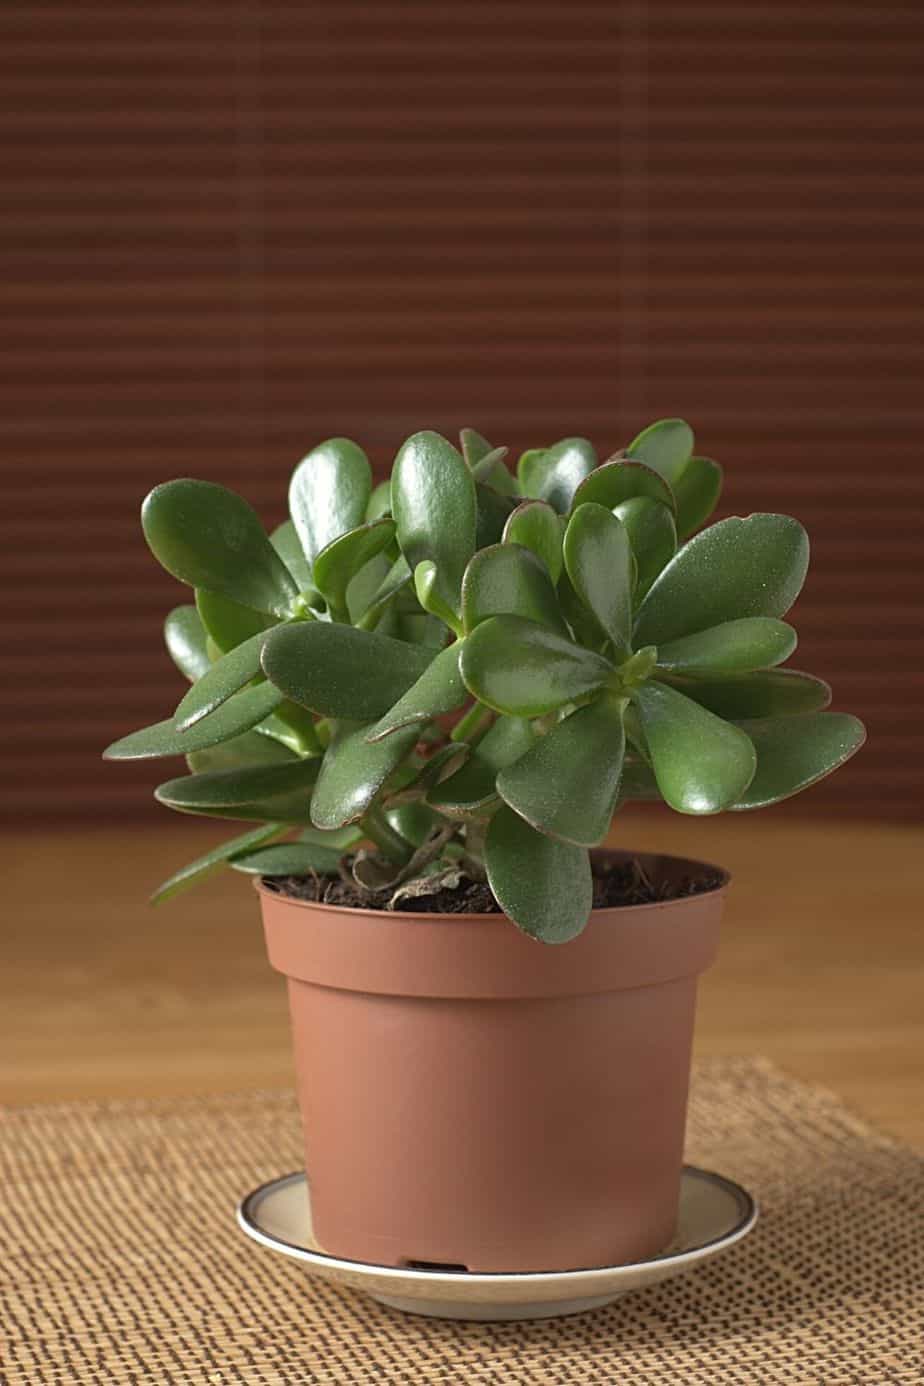 You can place the Jade Plant in a container filled with water, but make sure to replace the water every few days